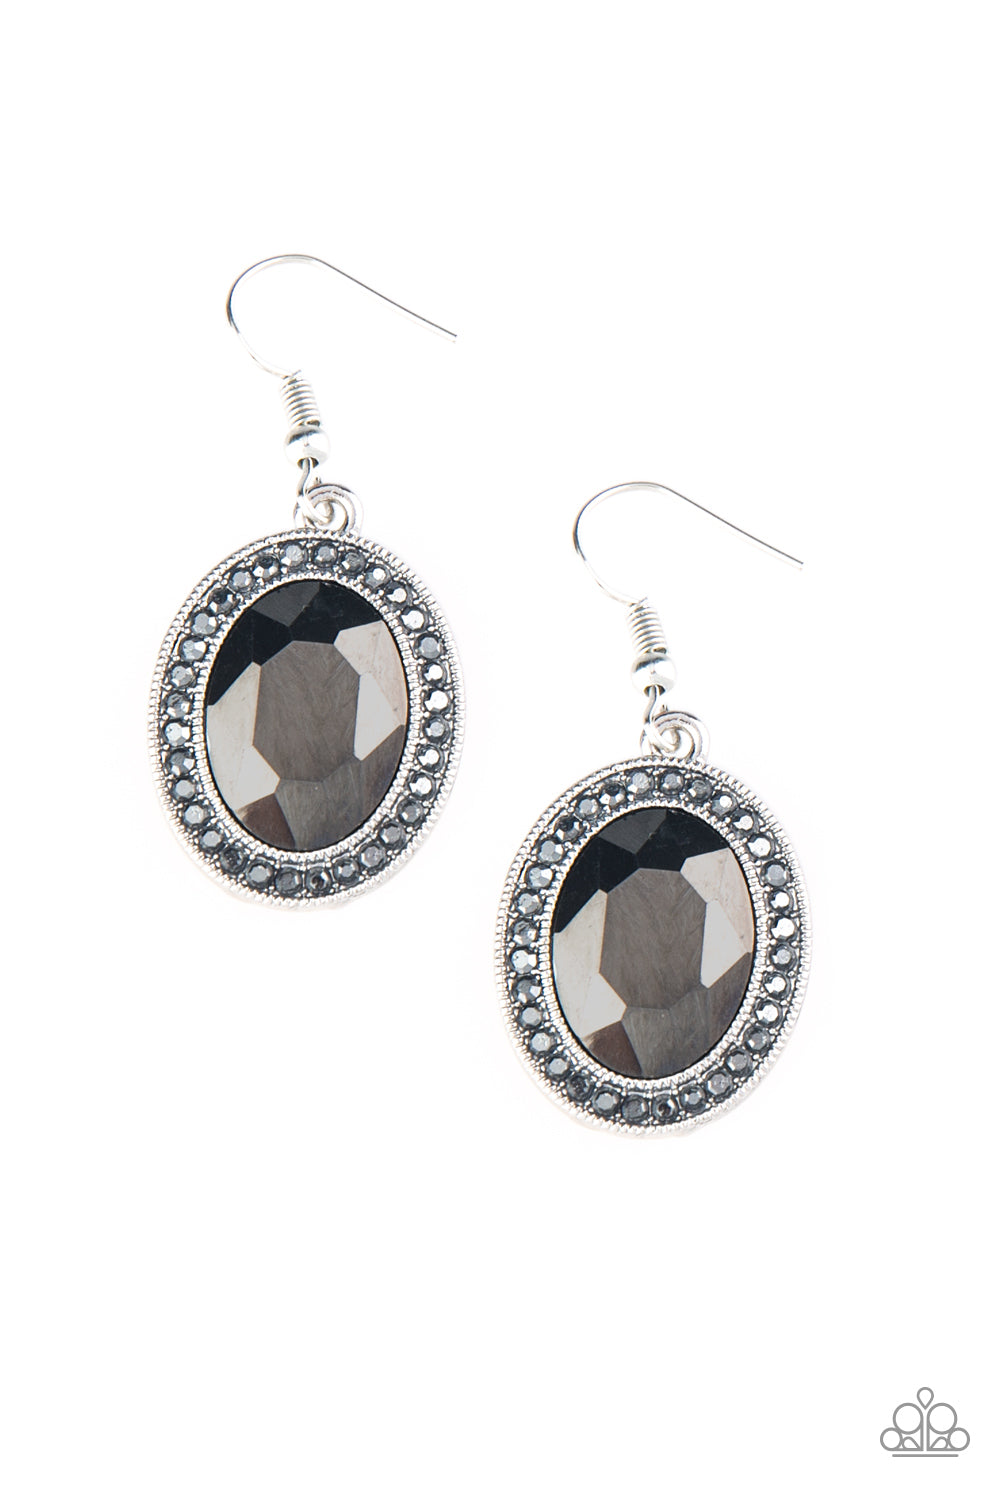 D95 - Only Fame In Town, Paparazzi Silver Earring by Paparazzi Accessories on Fancy5Fashion.com